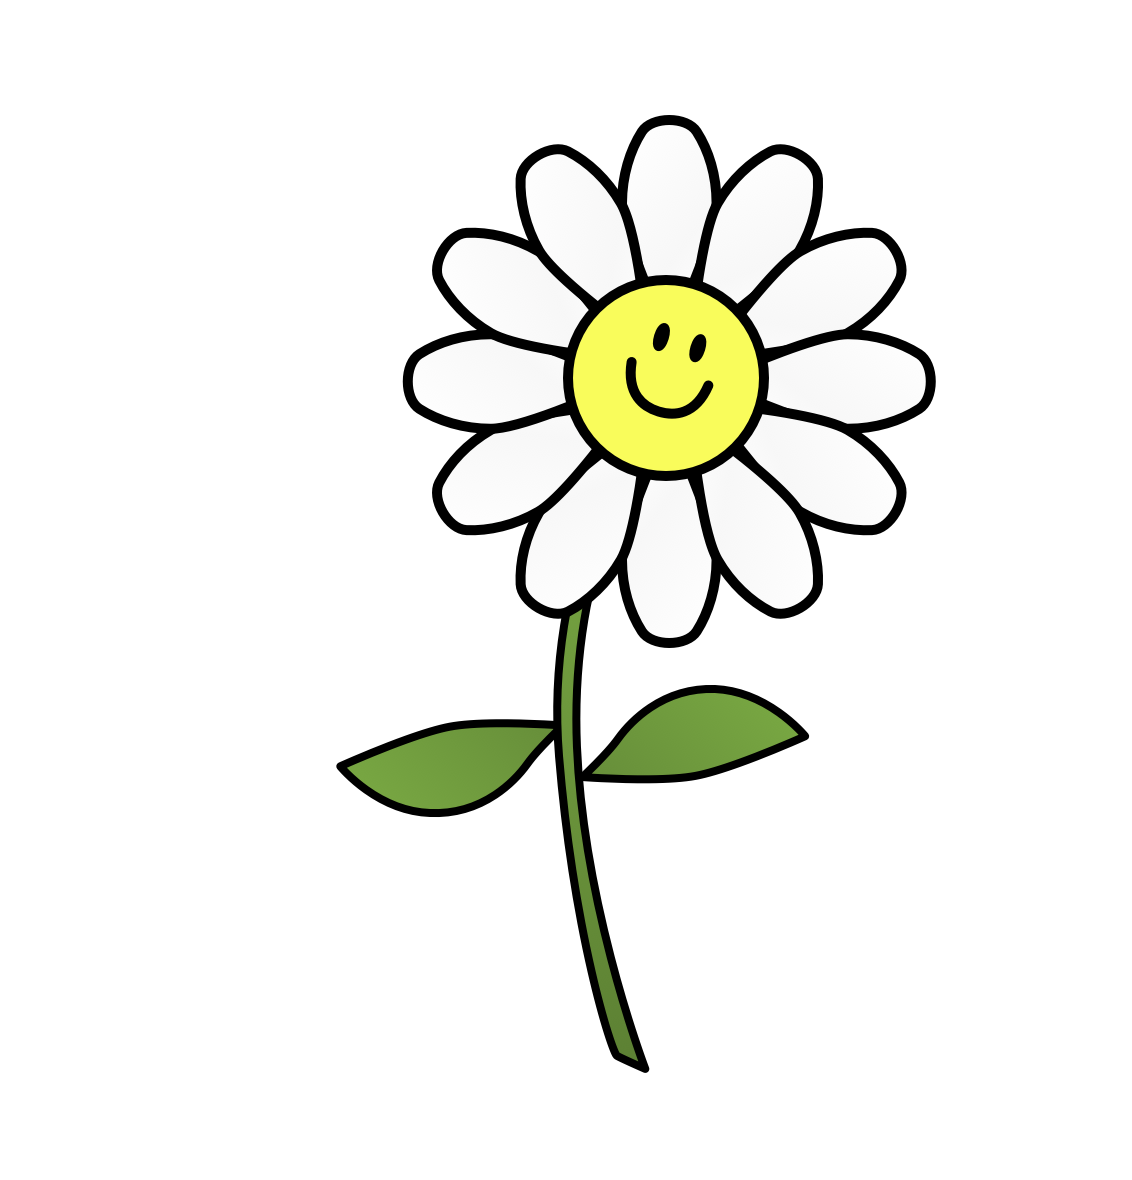 The fully rendered Flower component